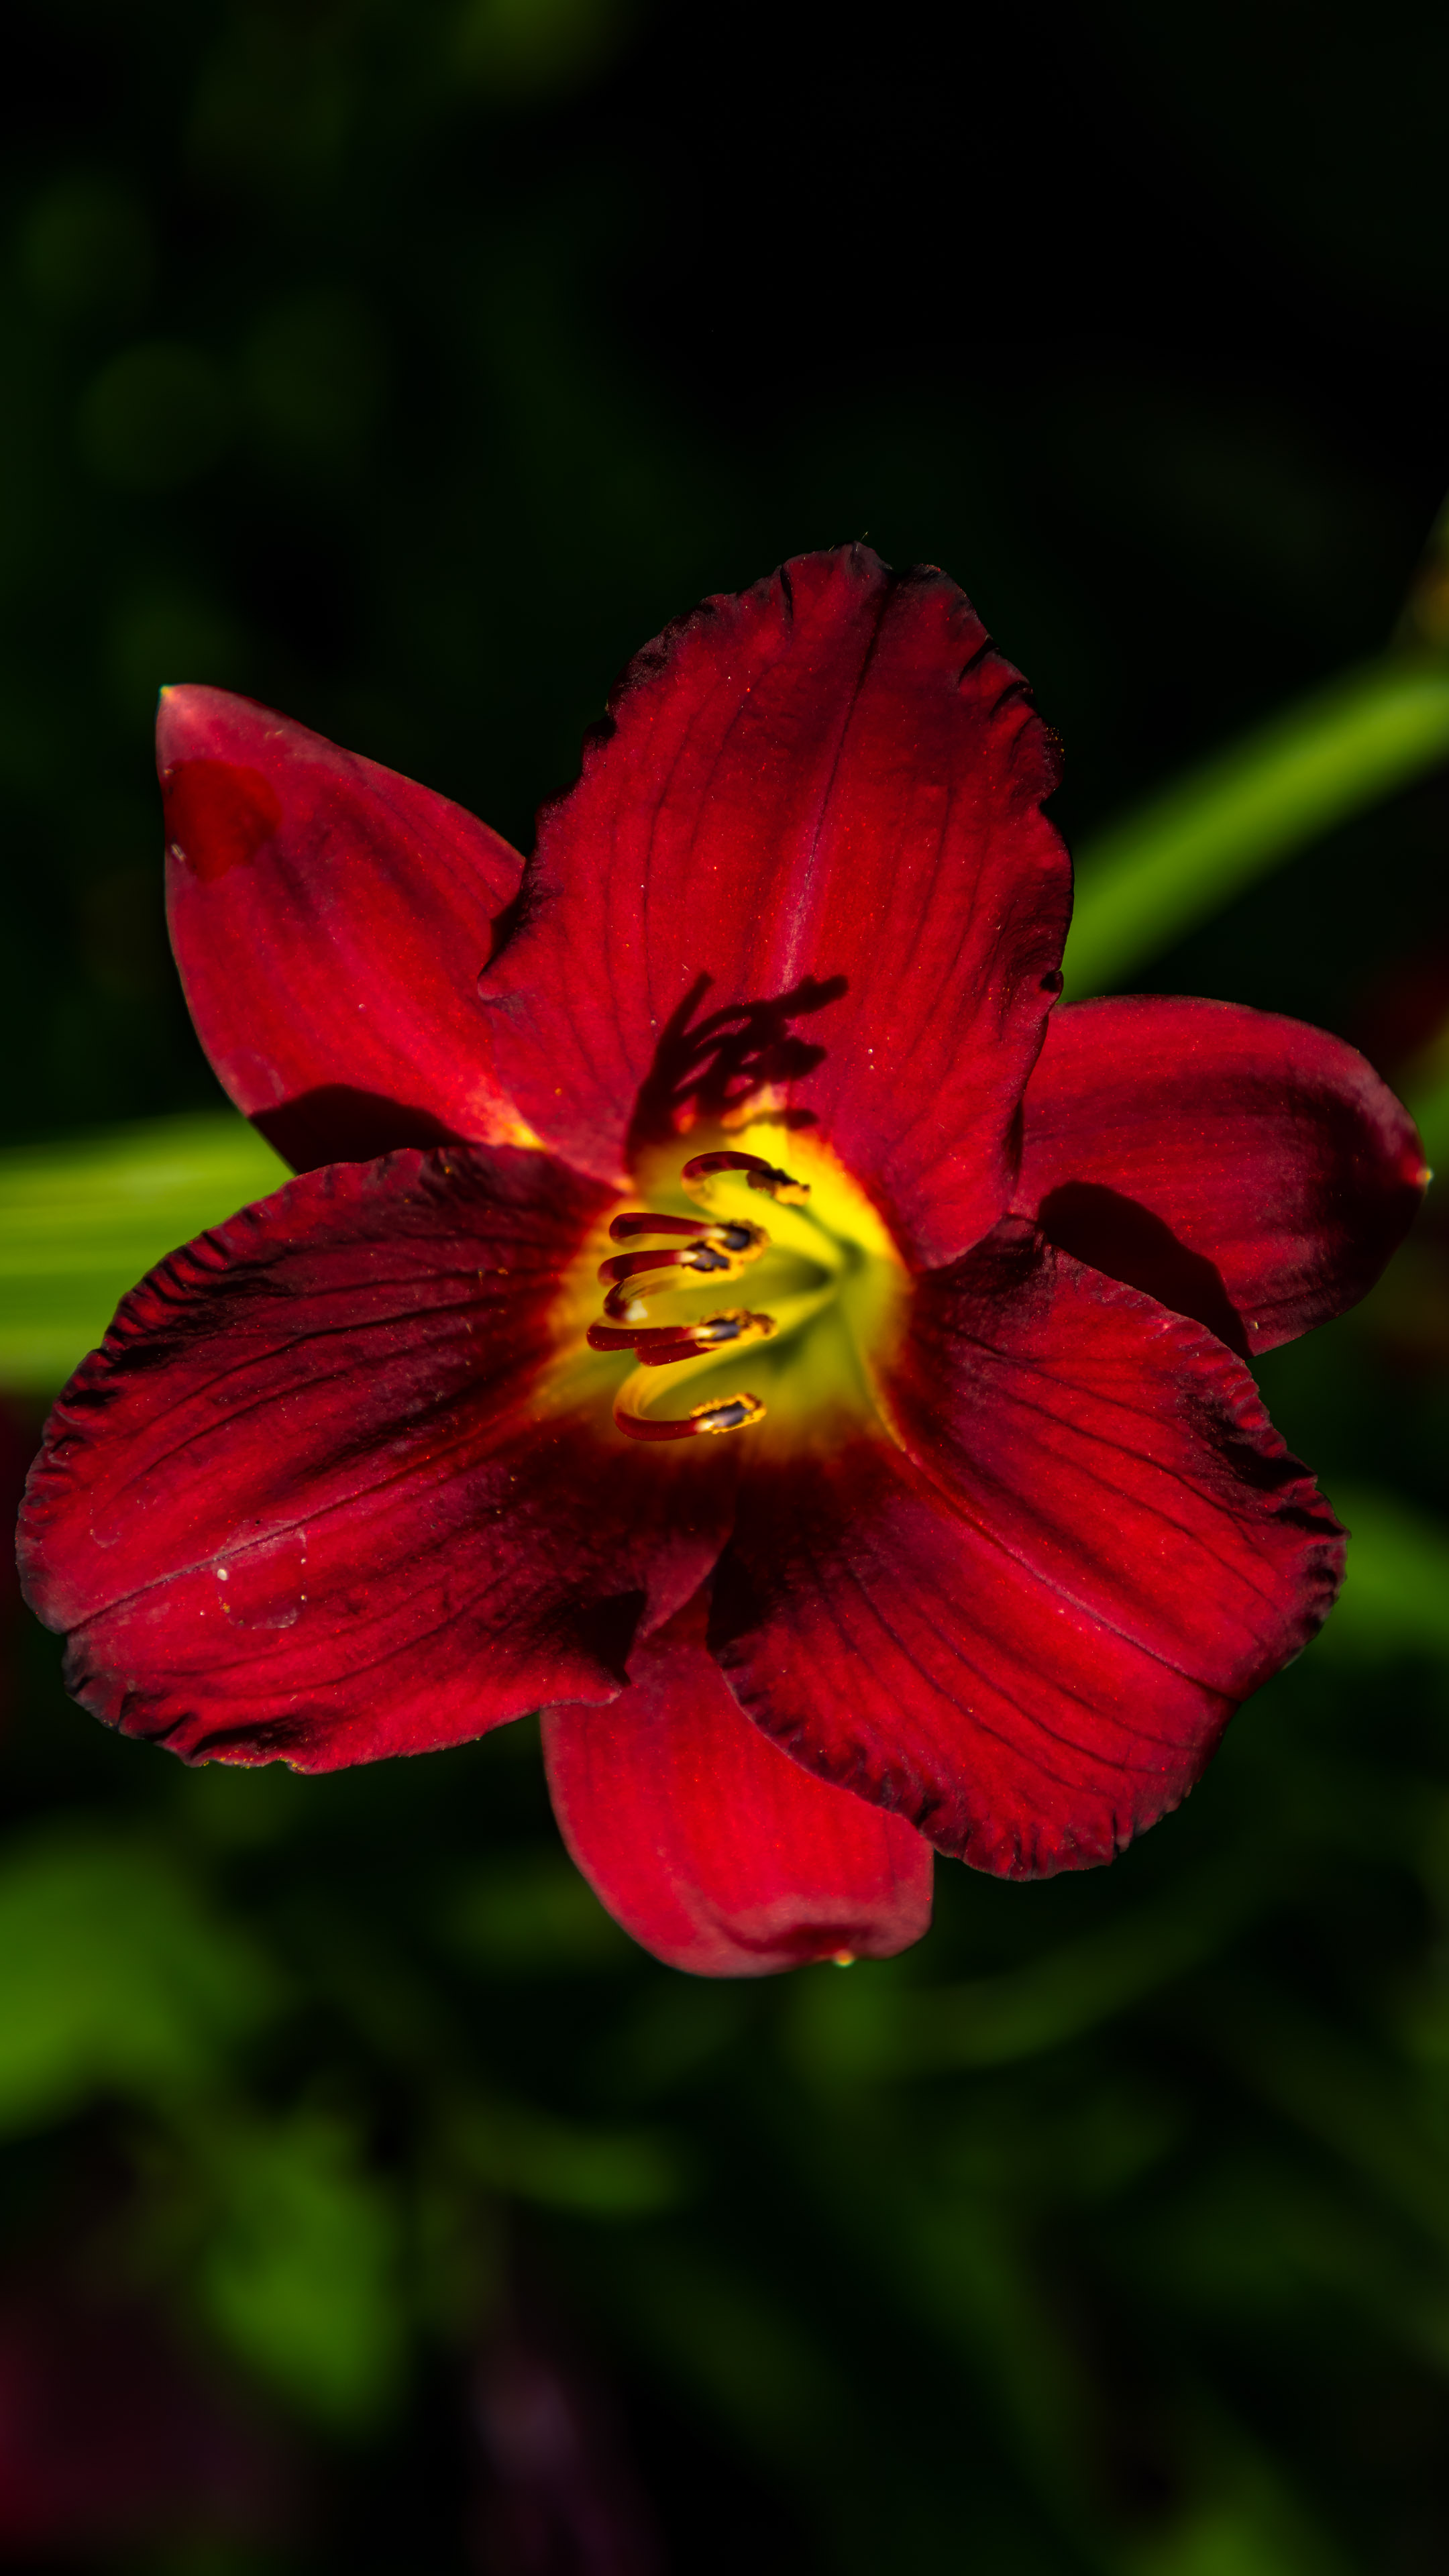 Experience the essence of nature's vibrancy on your phone screen with our ultra HD high-quality red flower images.